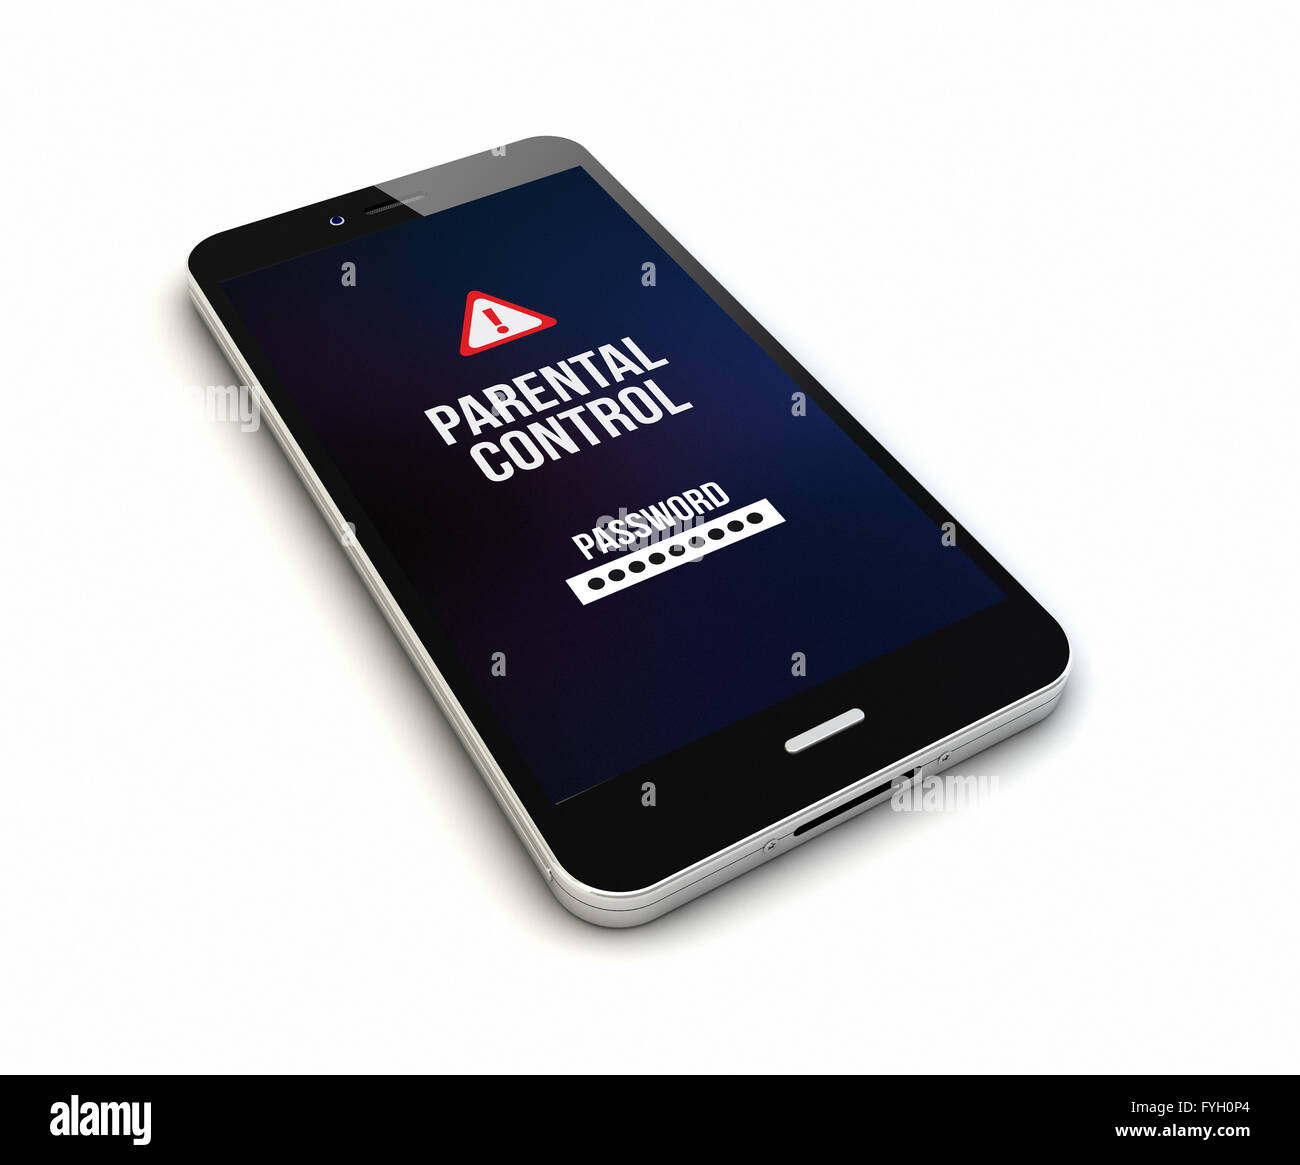 render of an original smartphone with parental control on the screen. Screen graphics are made up. Stock Photo